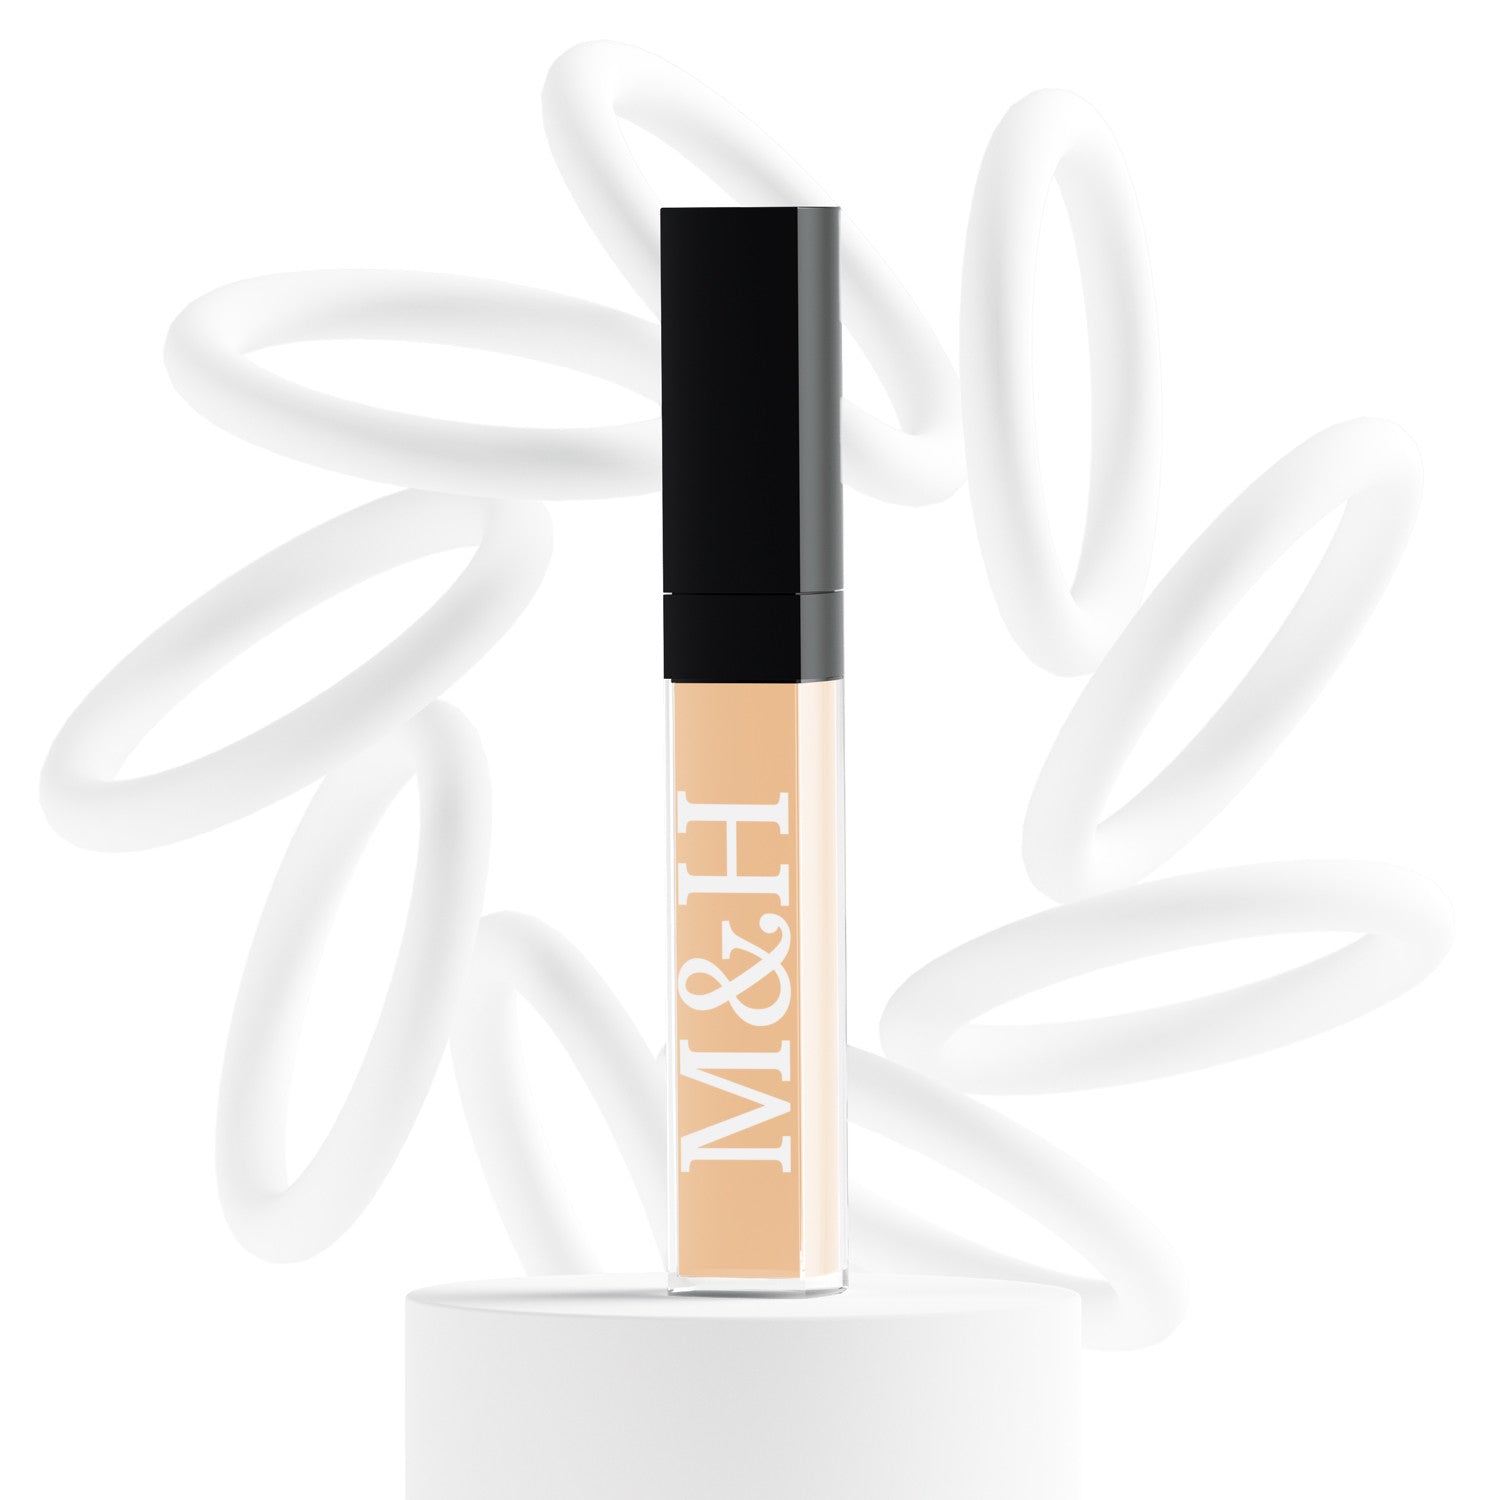 Vegan Concealers - M&H FashionVegan ConcealersconcealerM&H FashionM&H FashionConcealer-903Medium BeigeVegan ConcealersM&H FashionconcealerM&H Fashion This multifunctional concealer is designed to cover under-eye circles, complexion alterations, and major imperfections like scars, hyperpigmentation, burns, and tatVegan Concealers